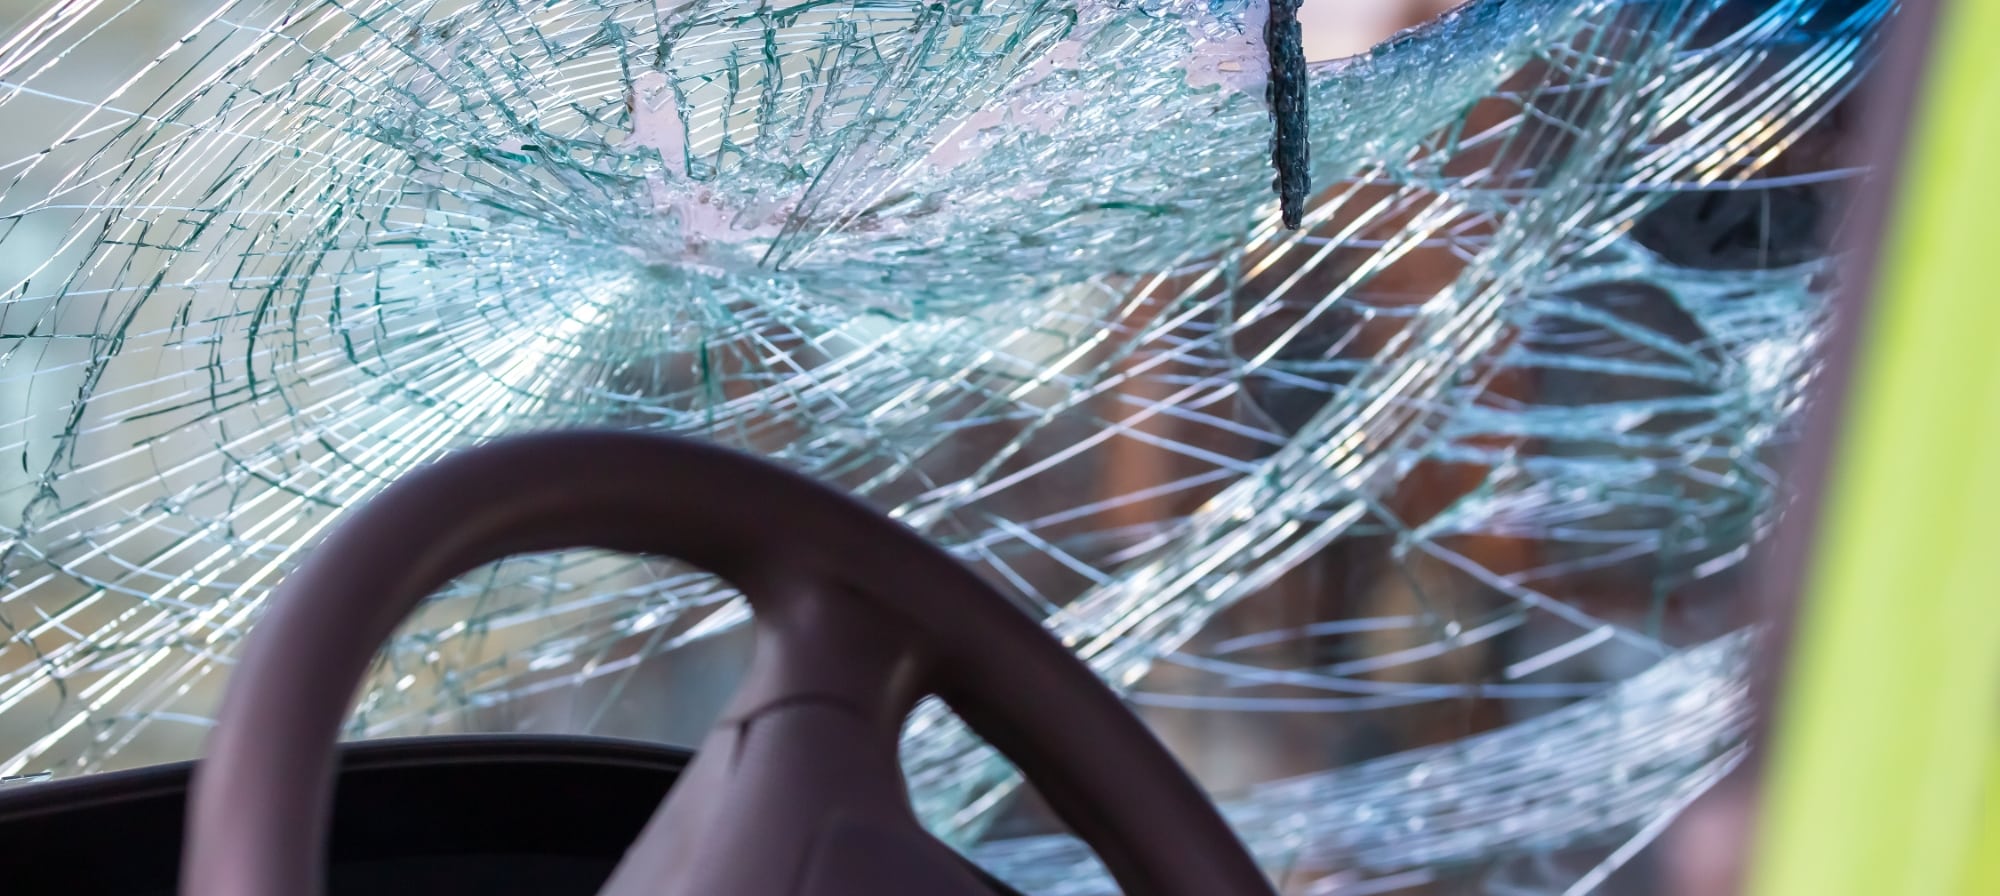 The windshield of a vehicle smashed after an accident.